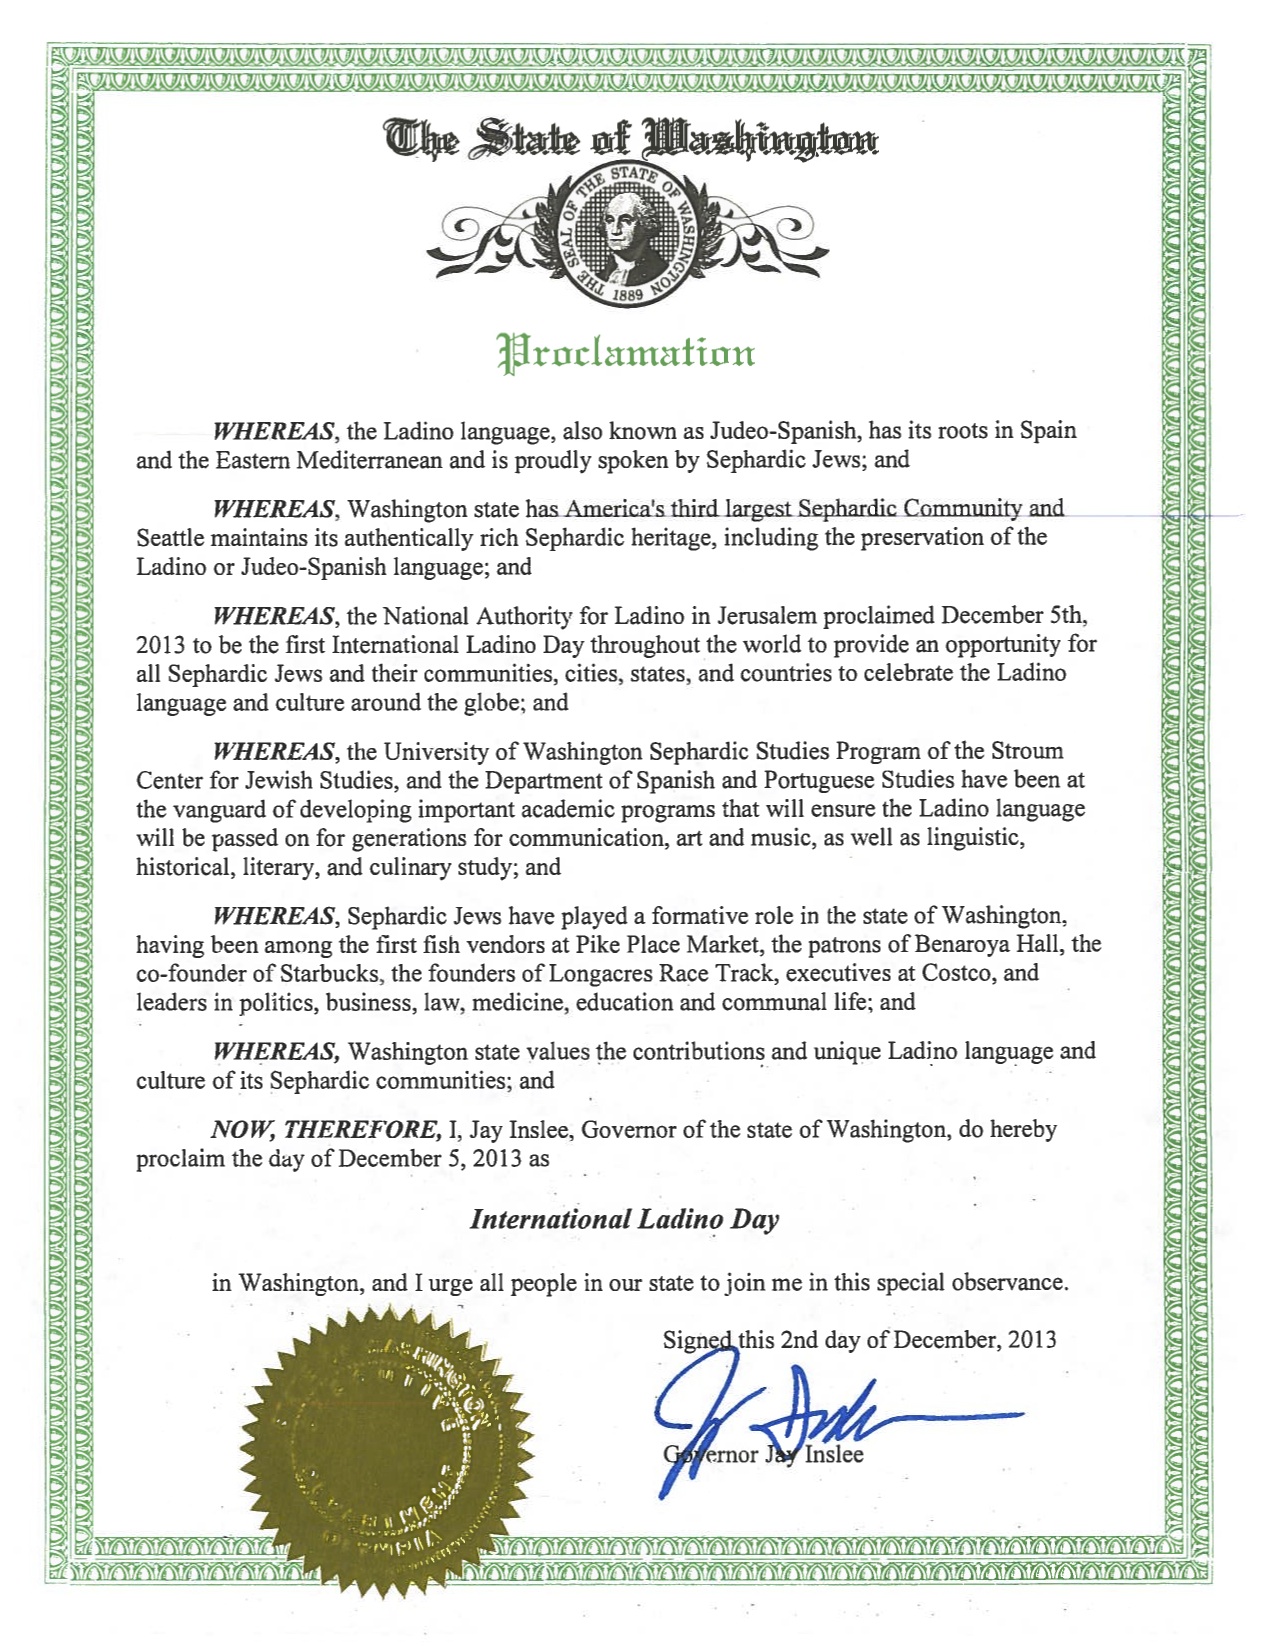 International Ladino Day Proclamation by Washington State Governor Jay Inslee, December 2nd 2013.